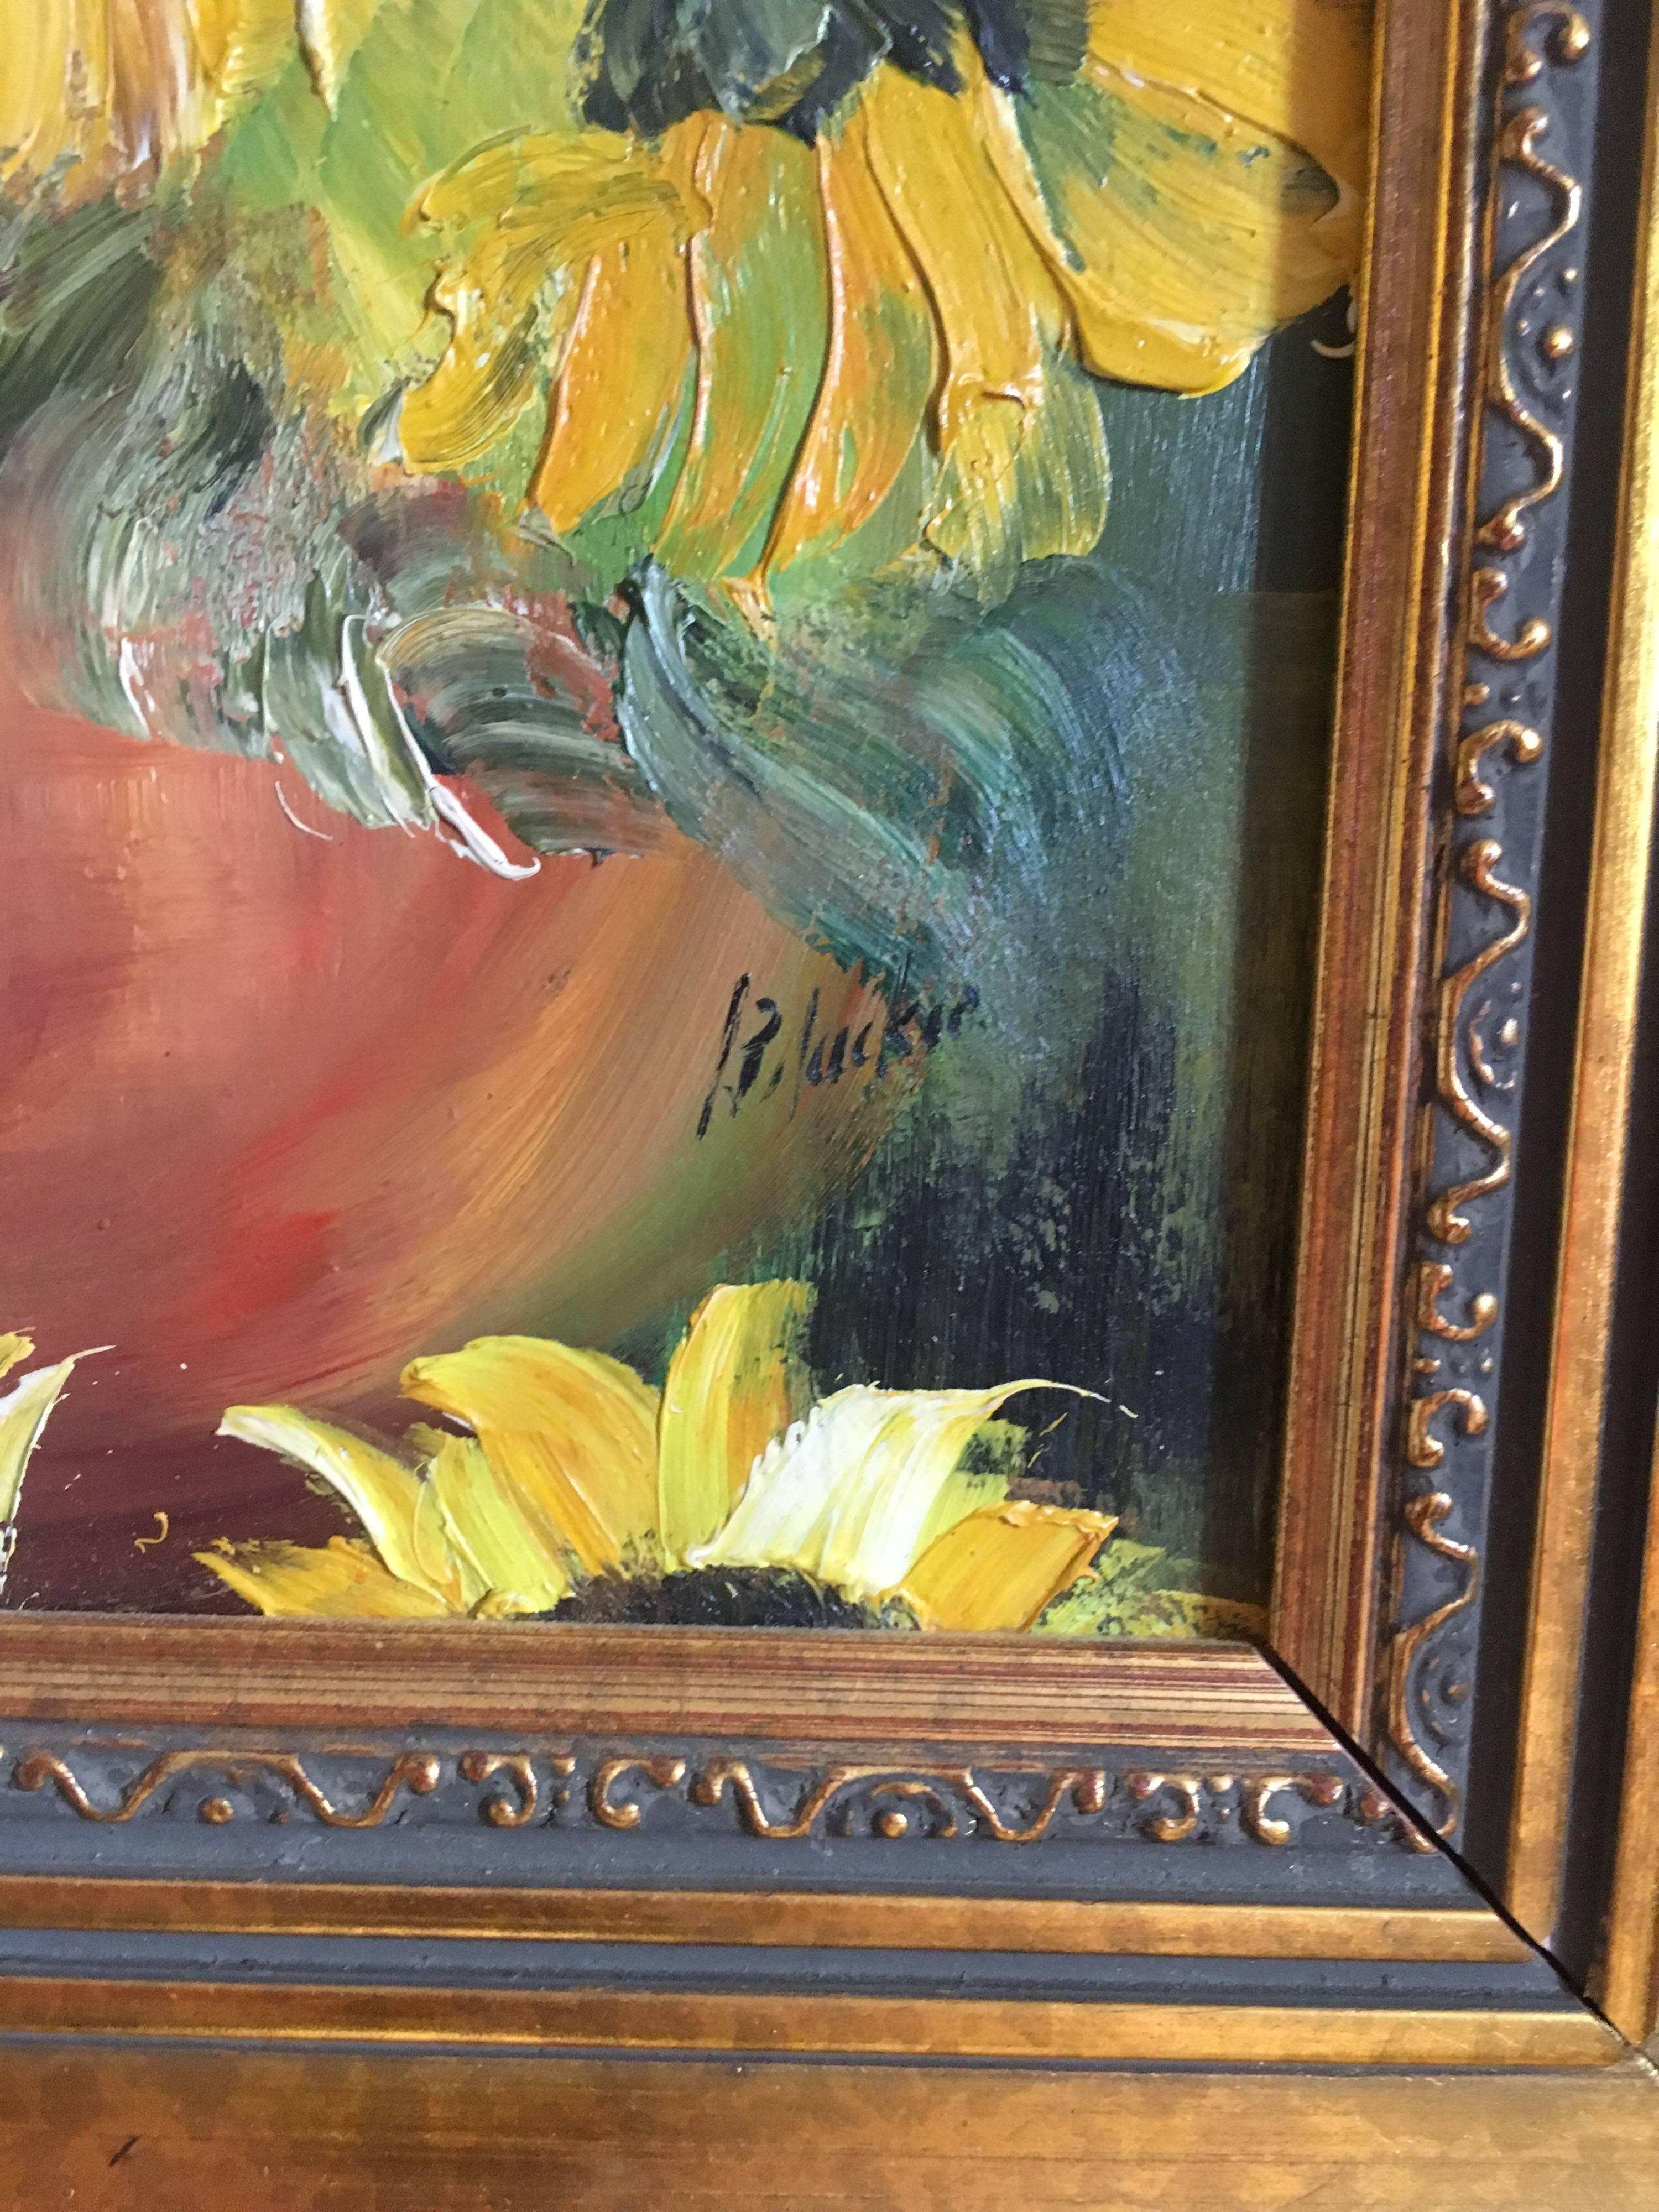 Sunflowers, Abstract Oil Painting, Impressionist
By Lillias Blackie, Scottish Artist, 20th Century
Signed by the artist on the right hand corner
Oil painting on board, framed
Framed size: 15.5 x 13.5 inches

Beautiful Sunflower floral arrangement,